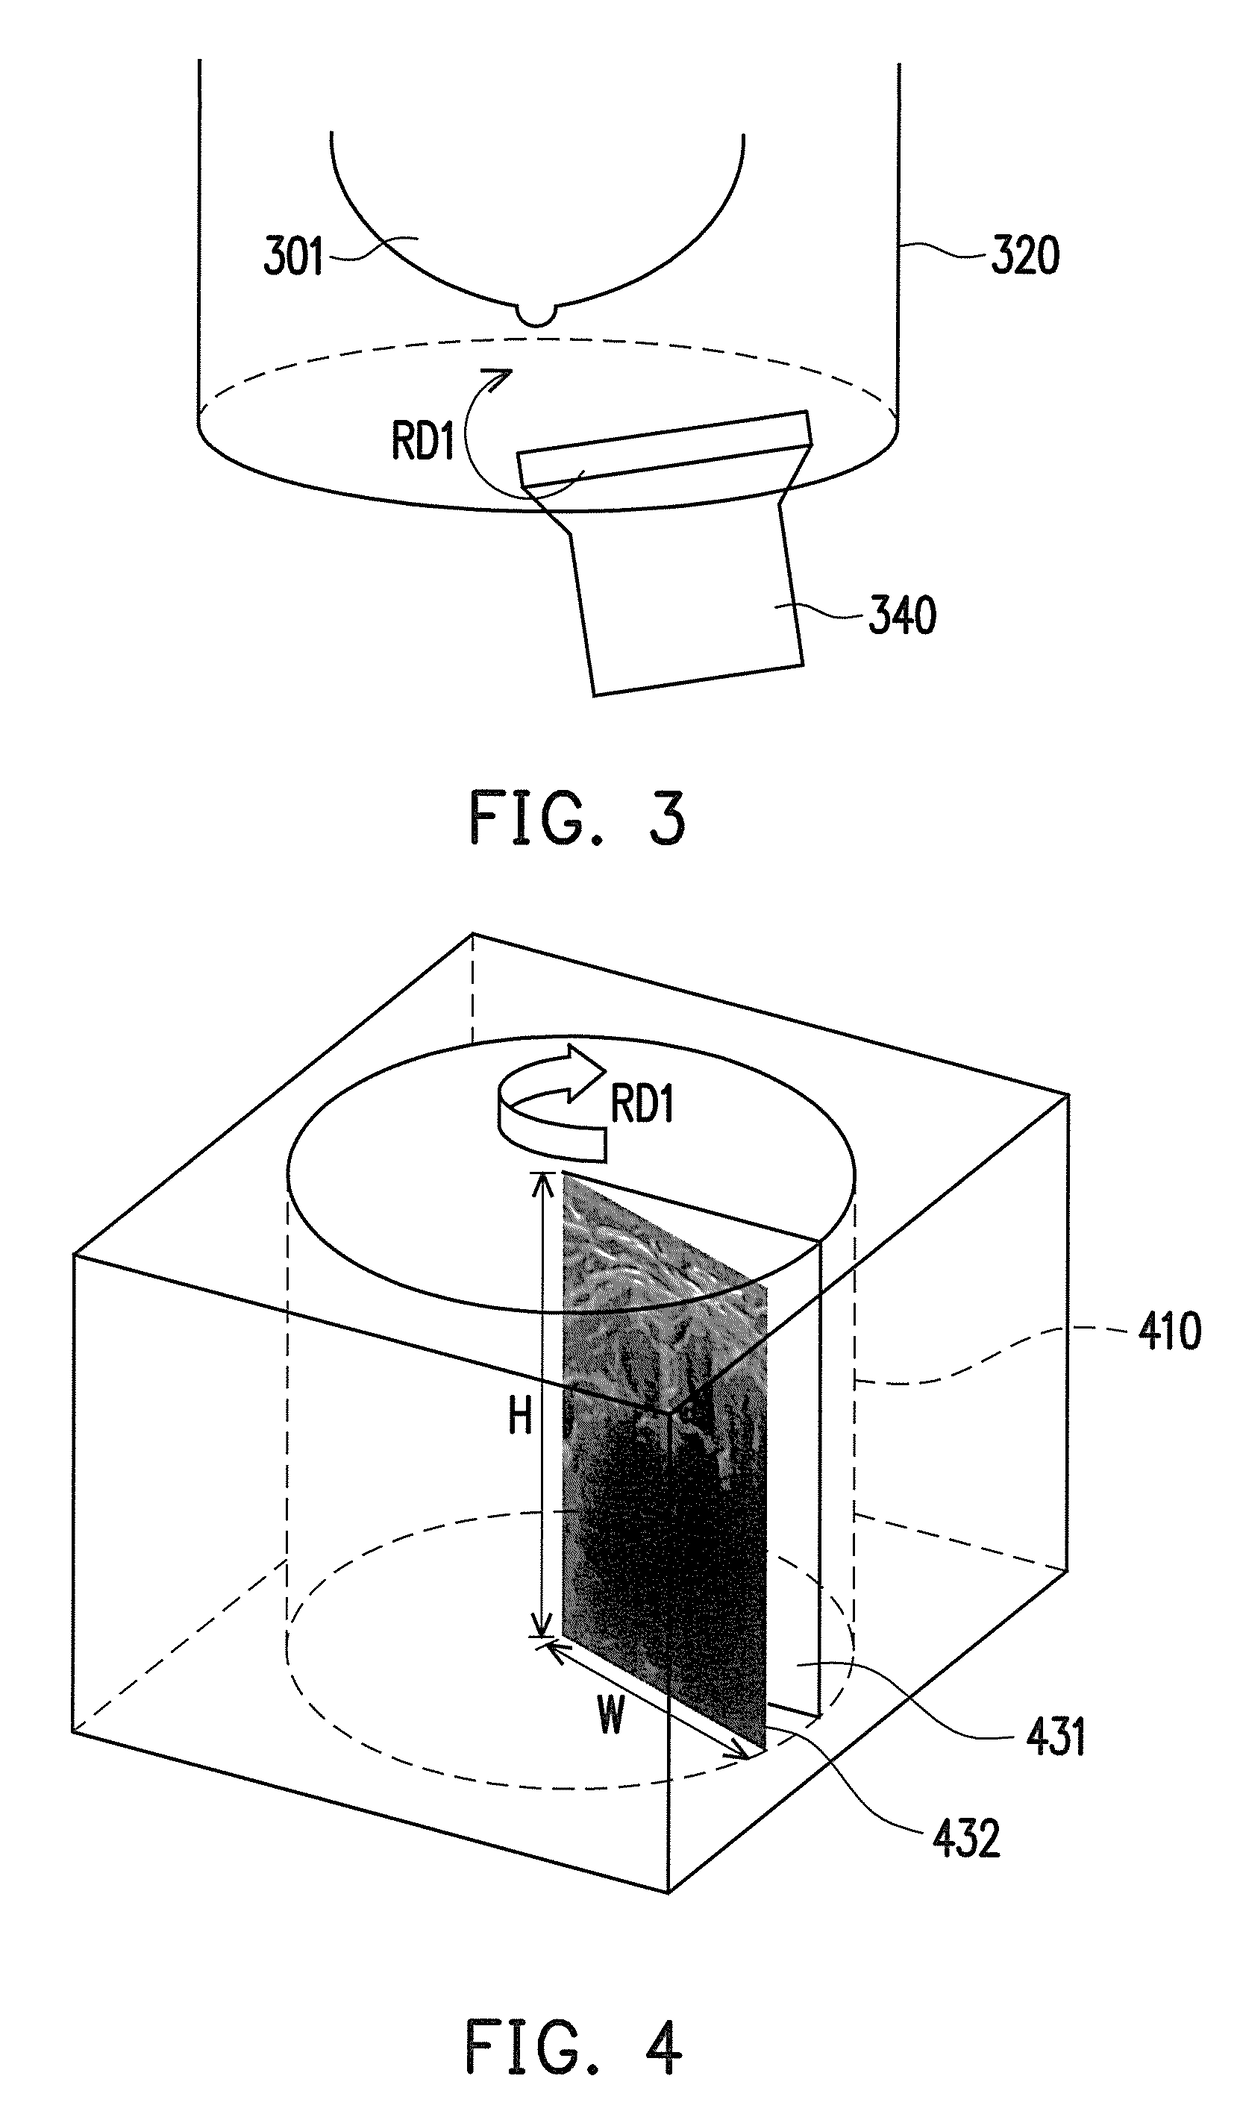 Lesion detecting method and lesion detecting apparatus for breast image in rotating manner